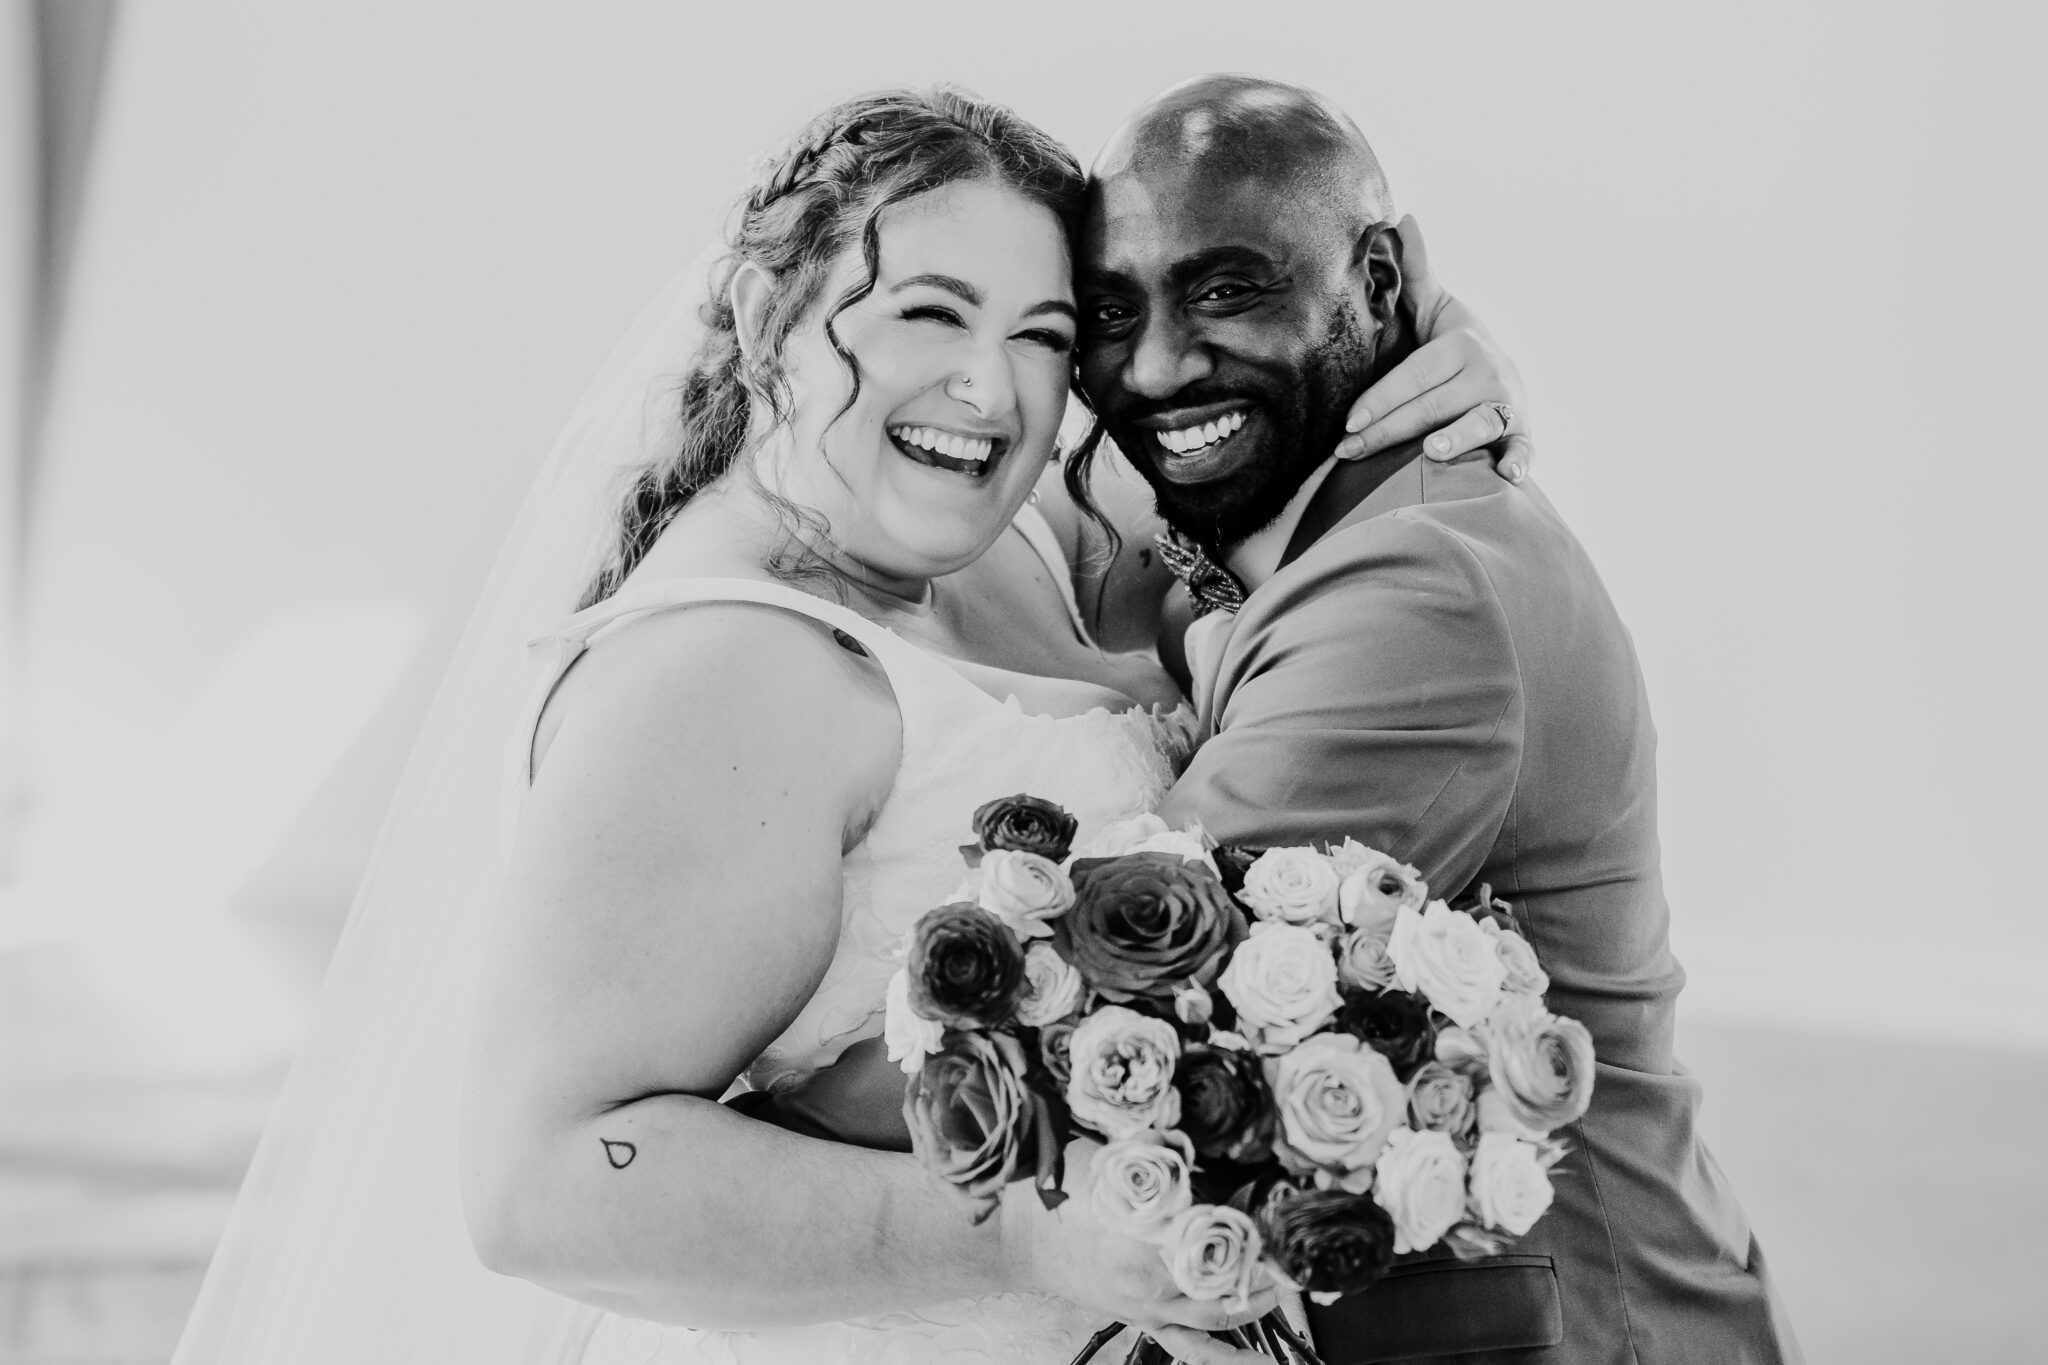 A mixed race couple smile at the camera as they embrace eachother lovingly.